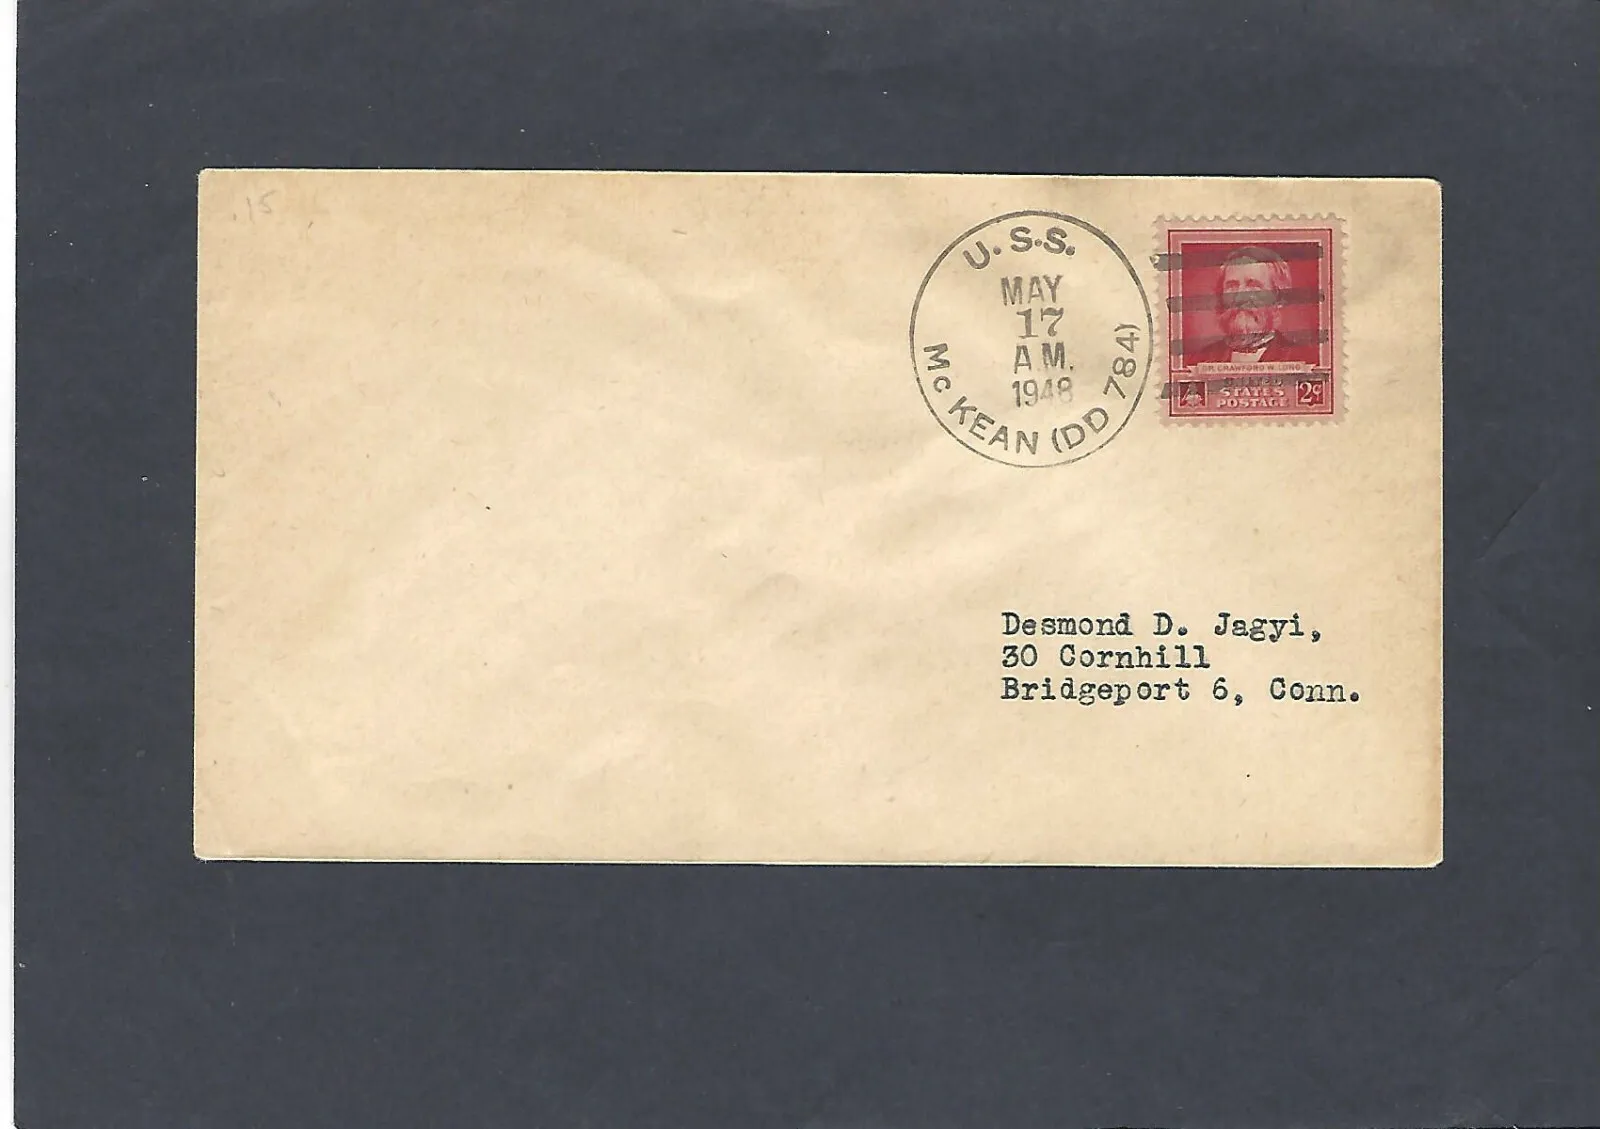 USS McKEAN NAVAL CANCEL COVER MAY 17-1948